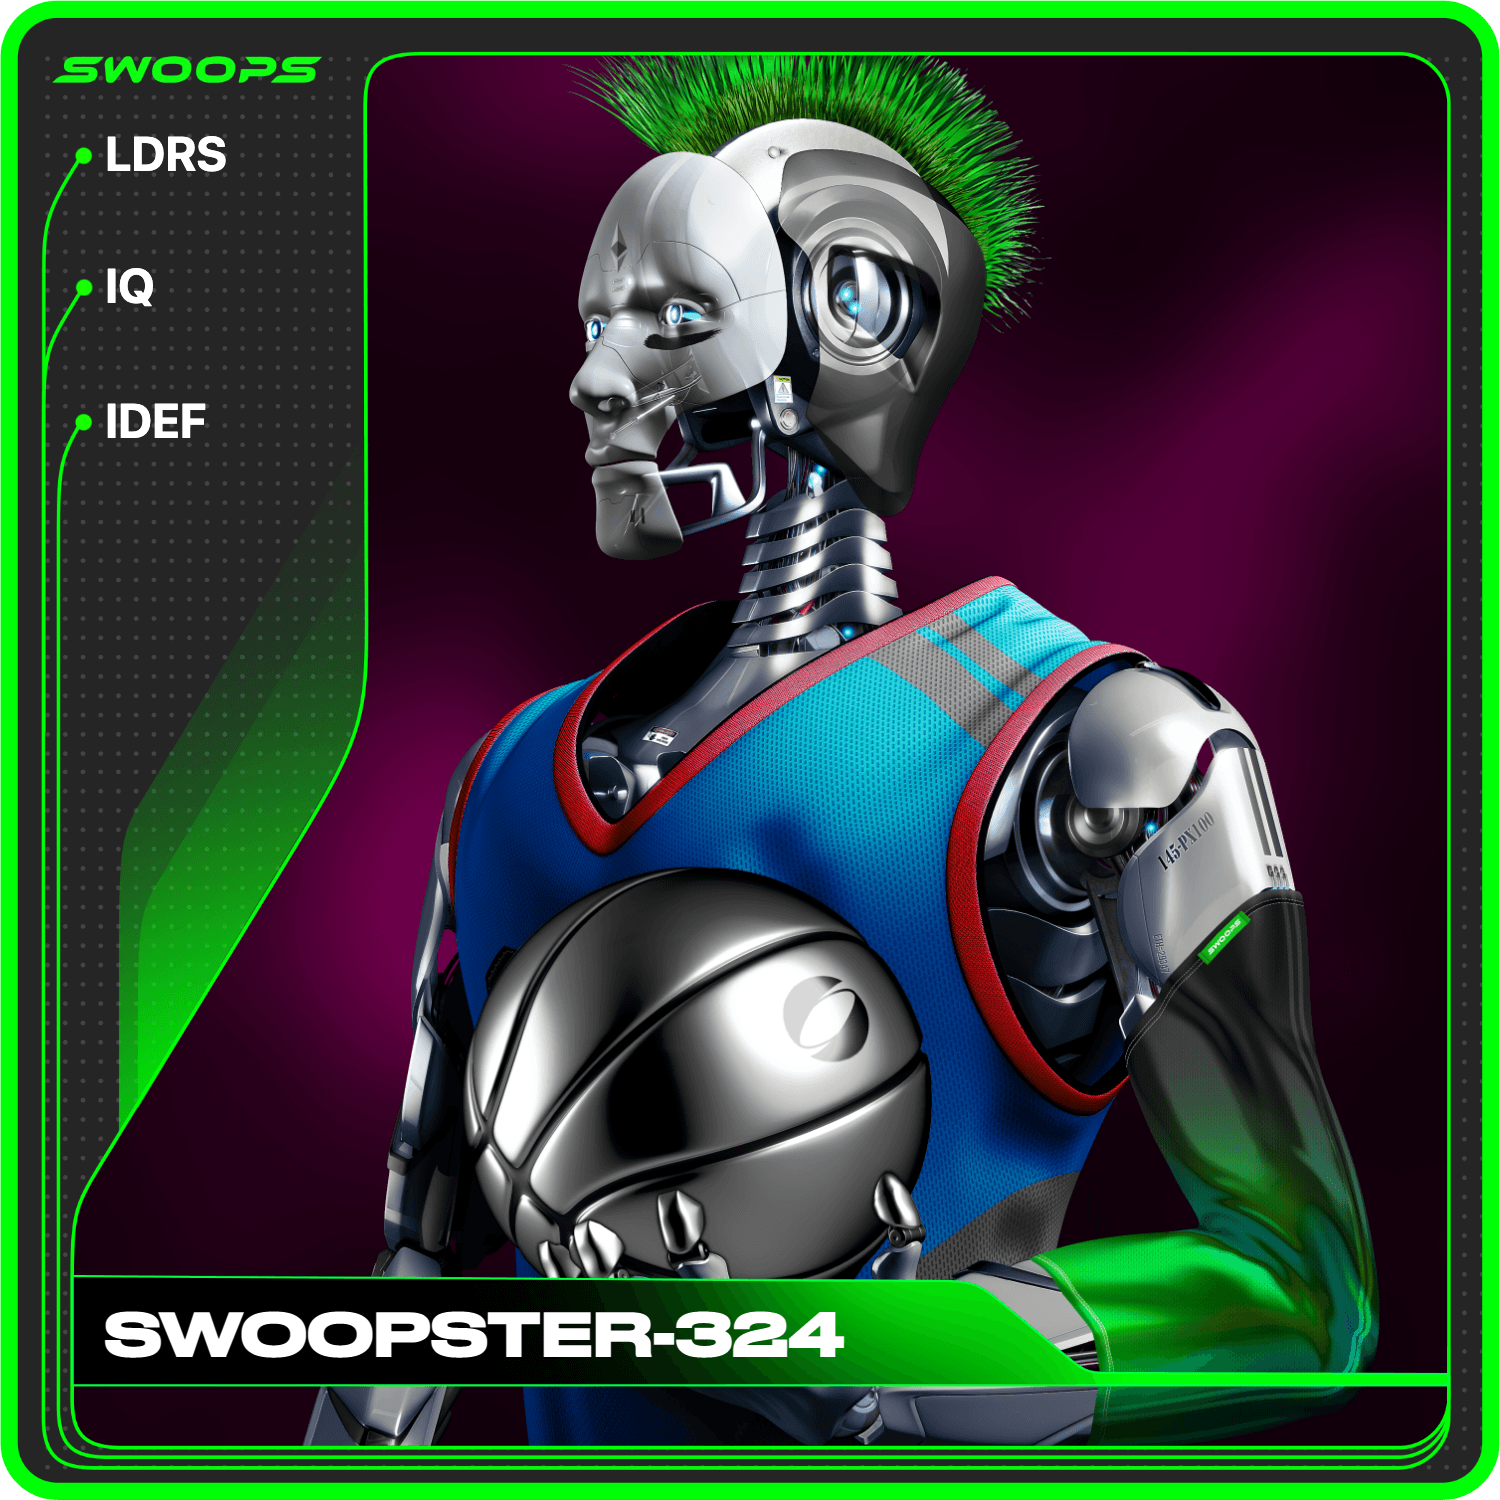 SWOOPSTER-324